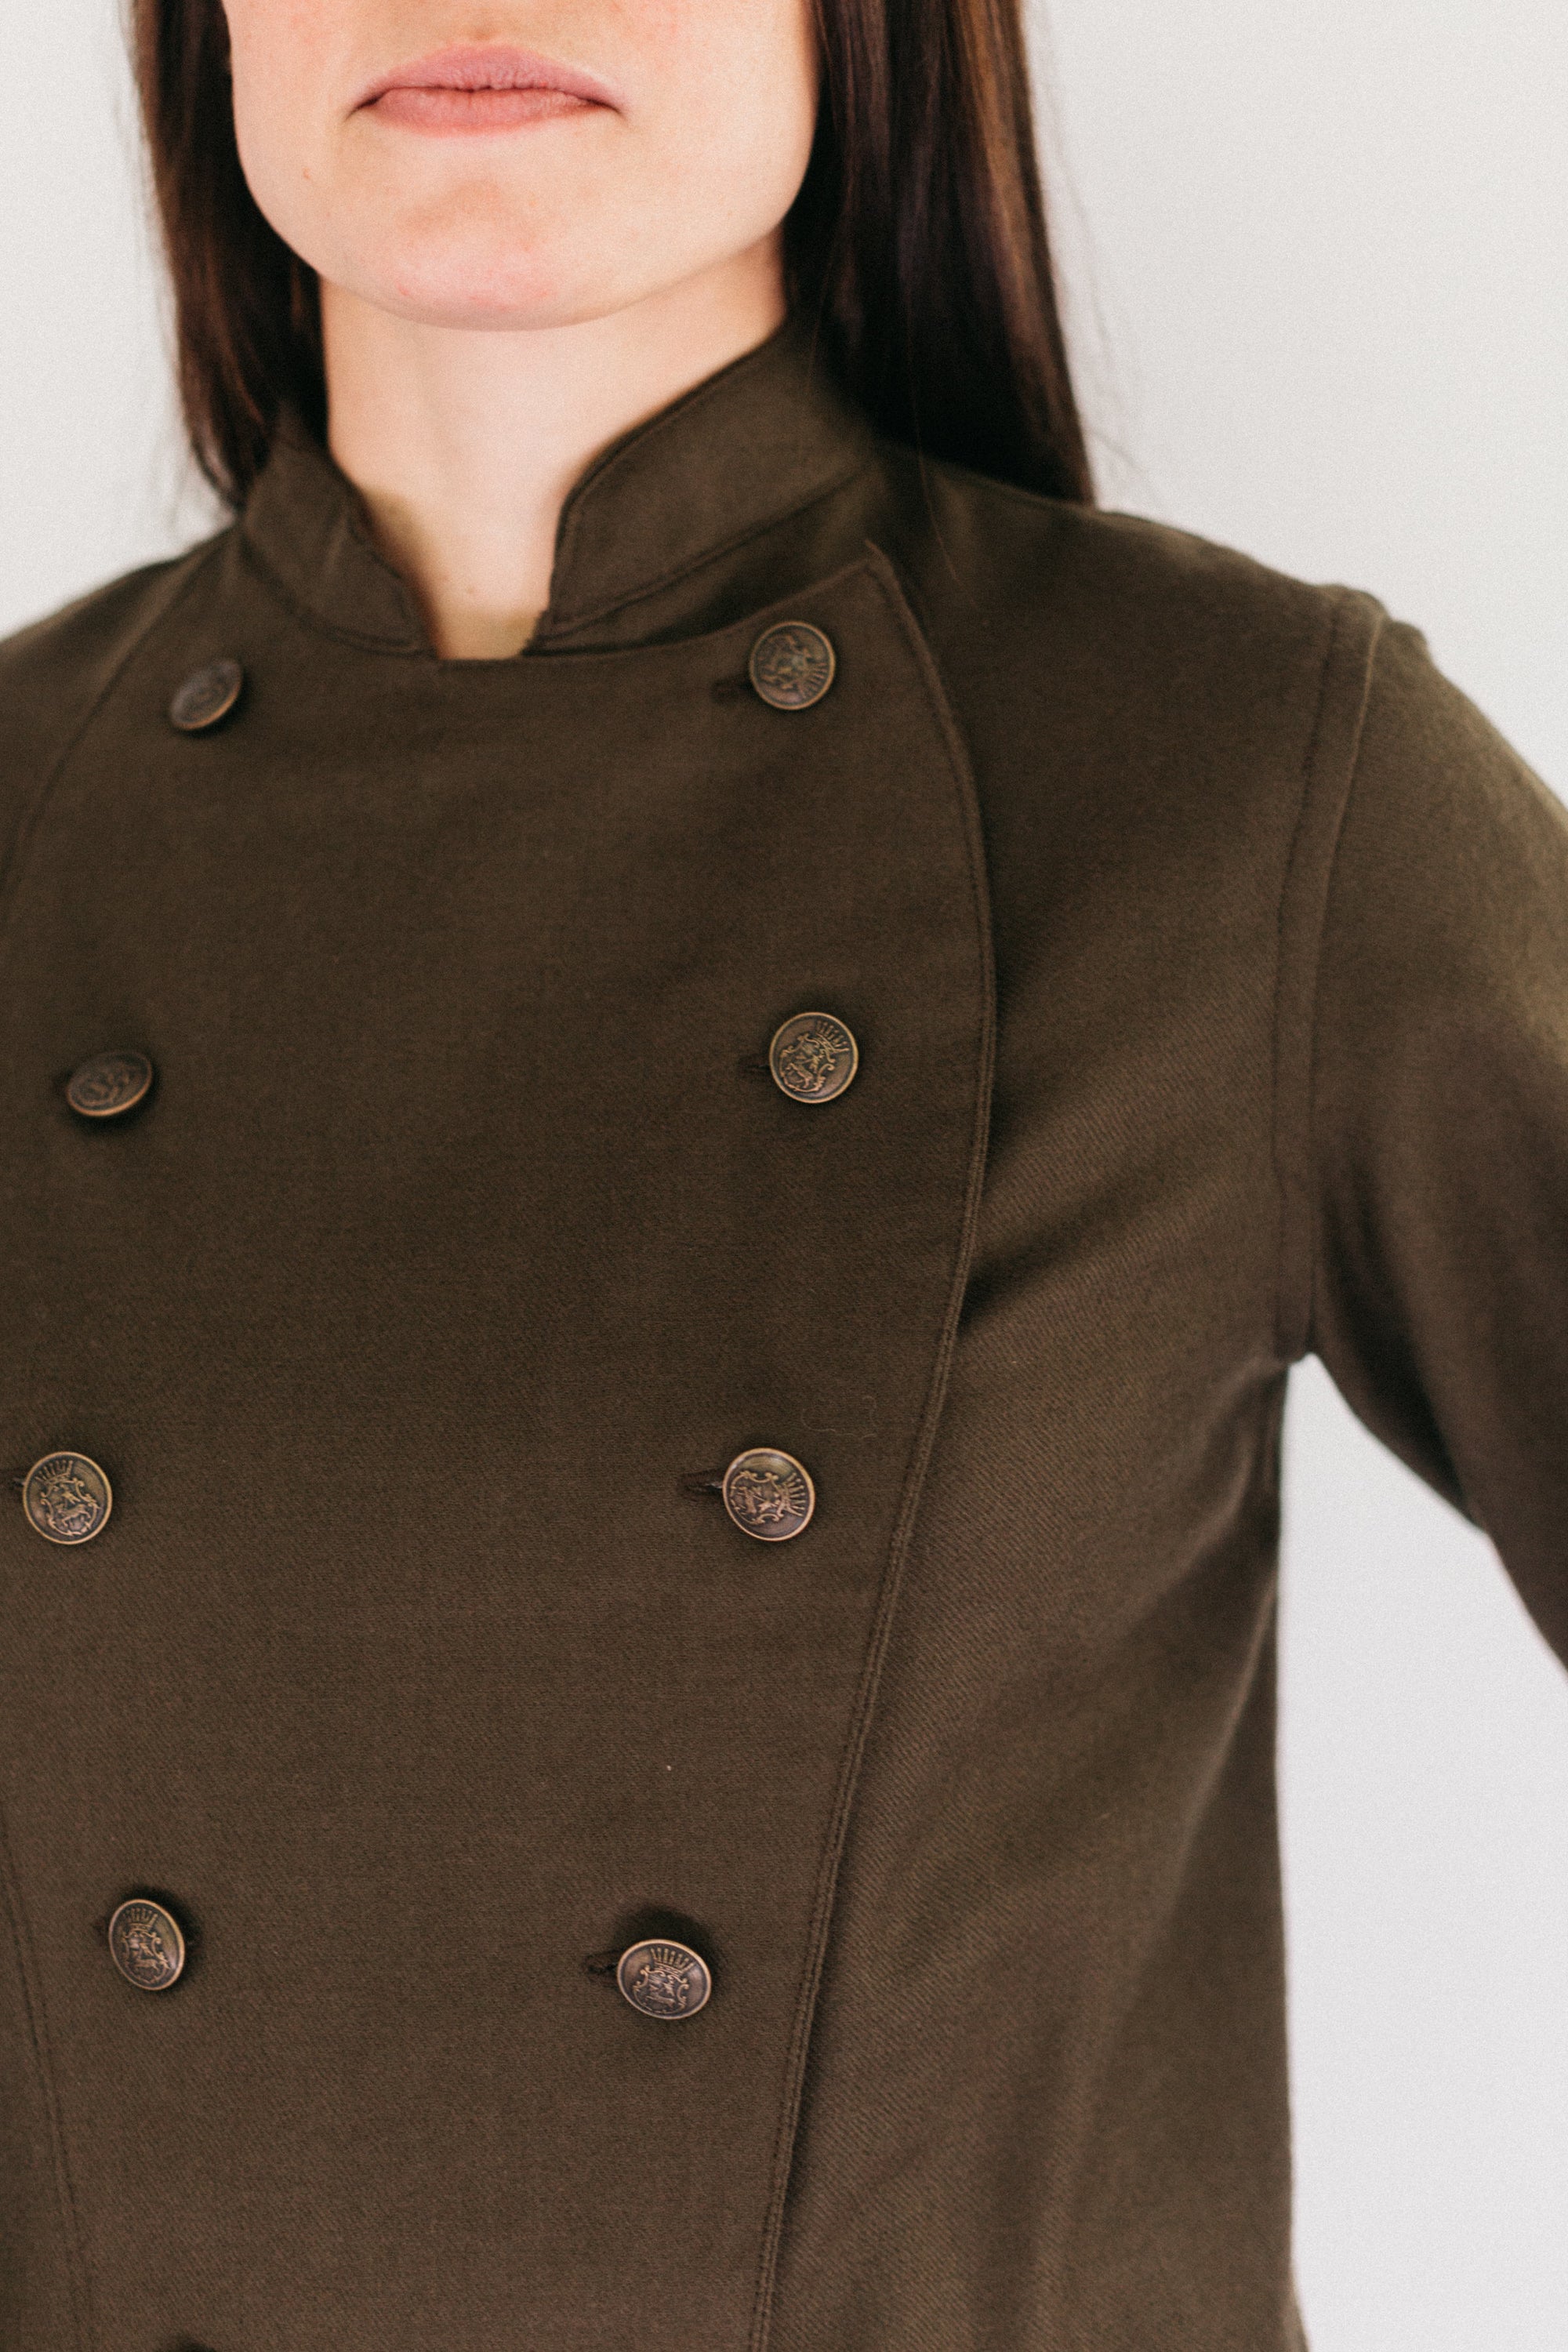 Close up of woman's brown chef's jacket.